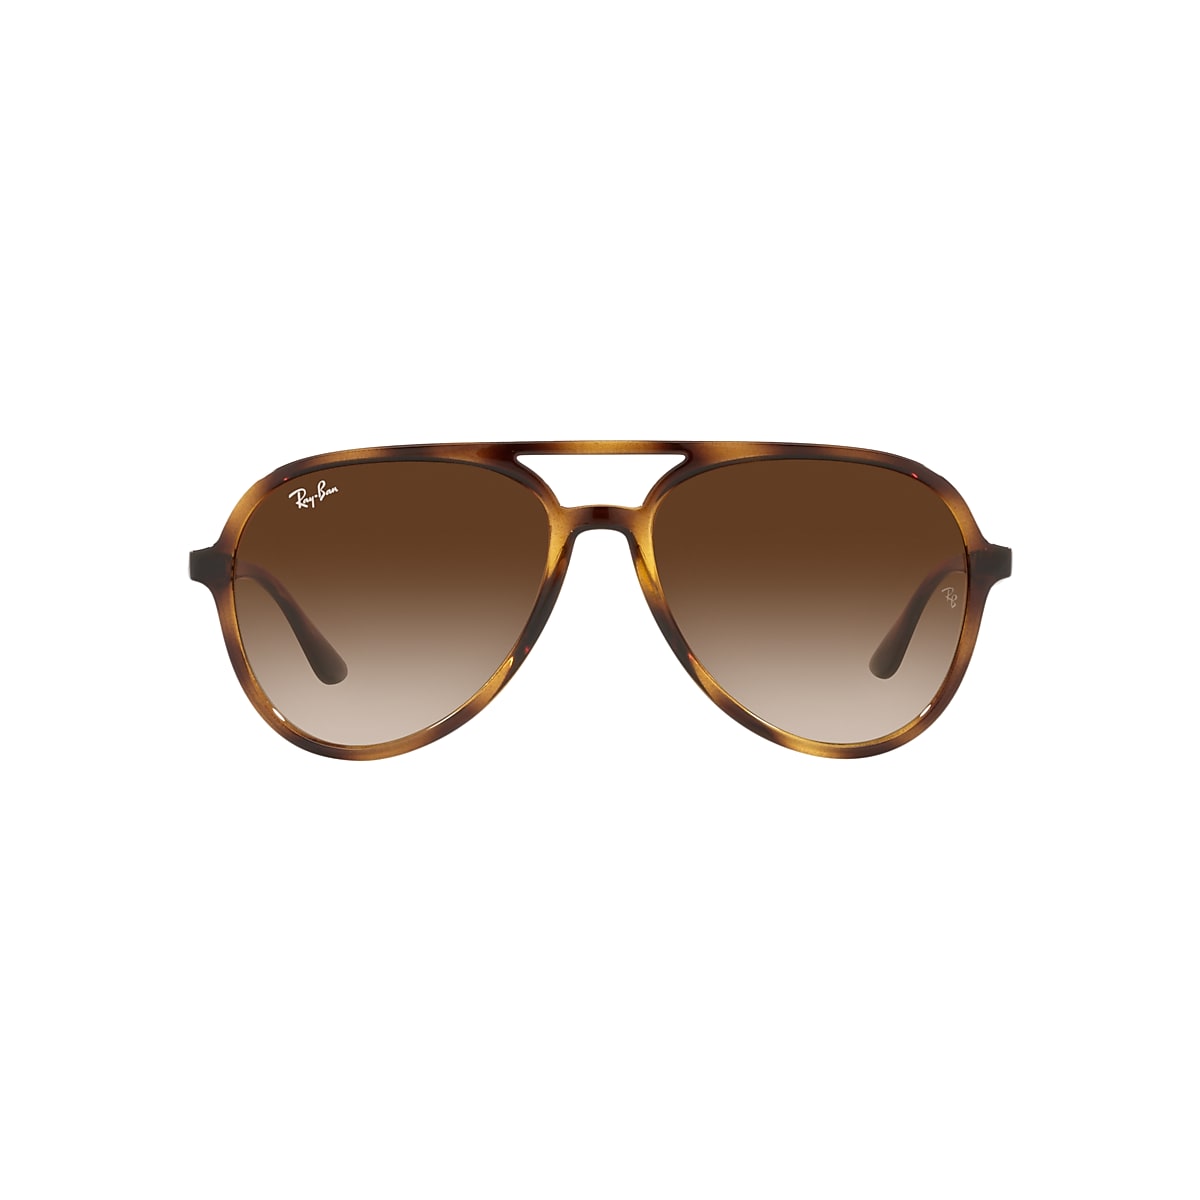 Ray-Ban 0RB4376 Sunglasses in Tortoise | Target Optical